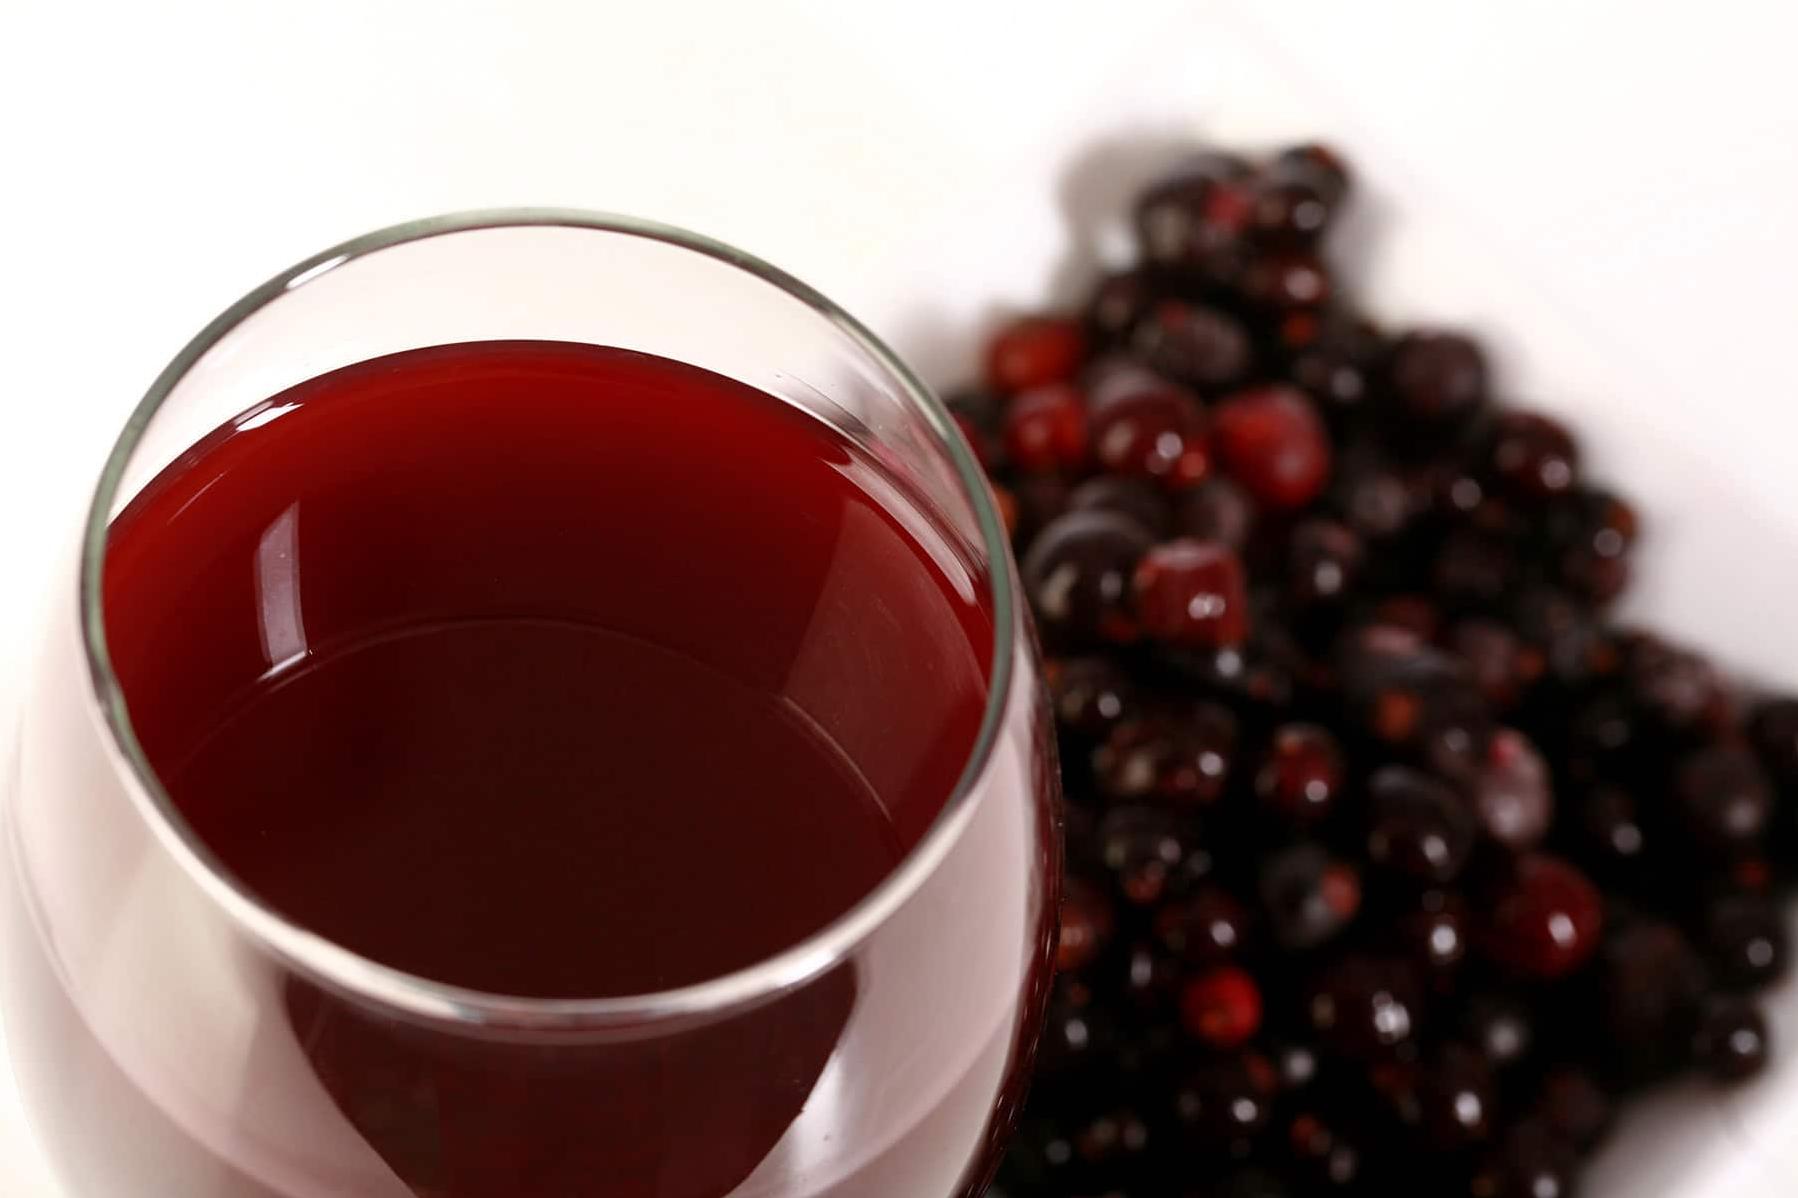  The best wine comes from the juiciest fruits.